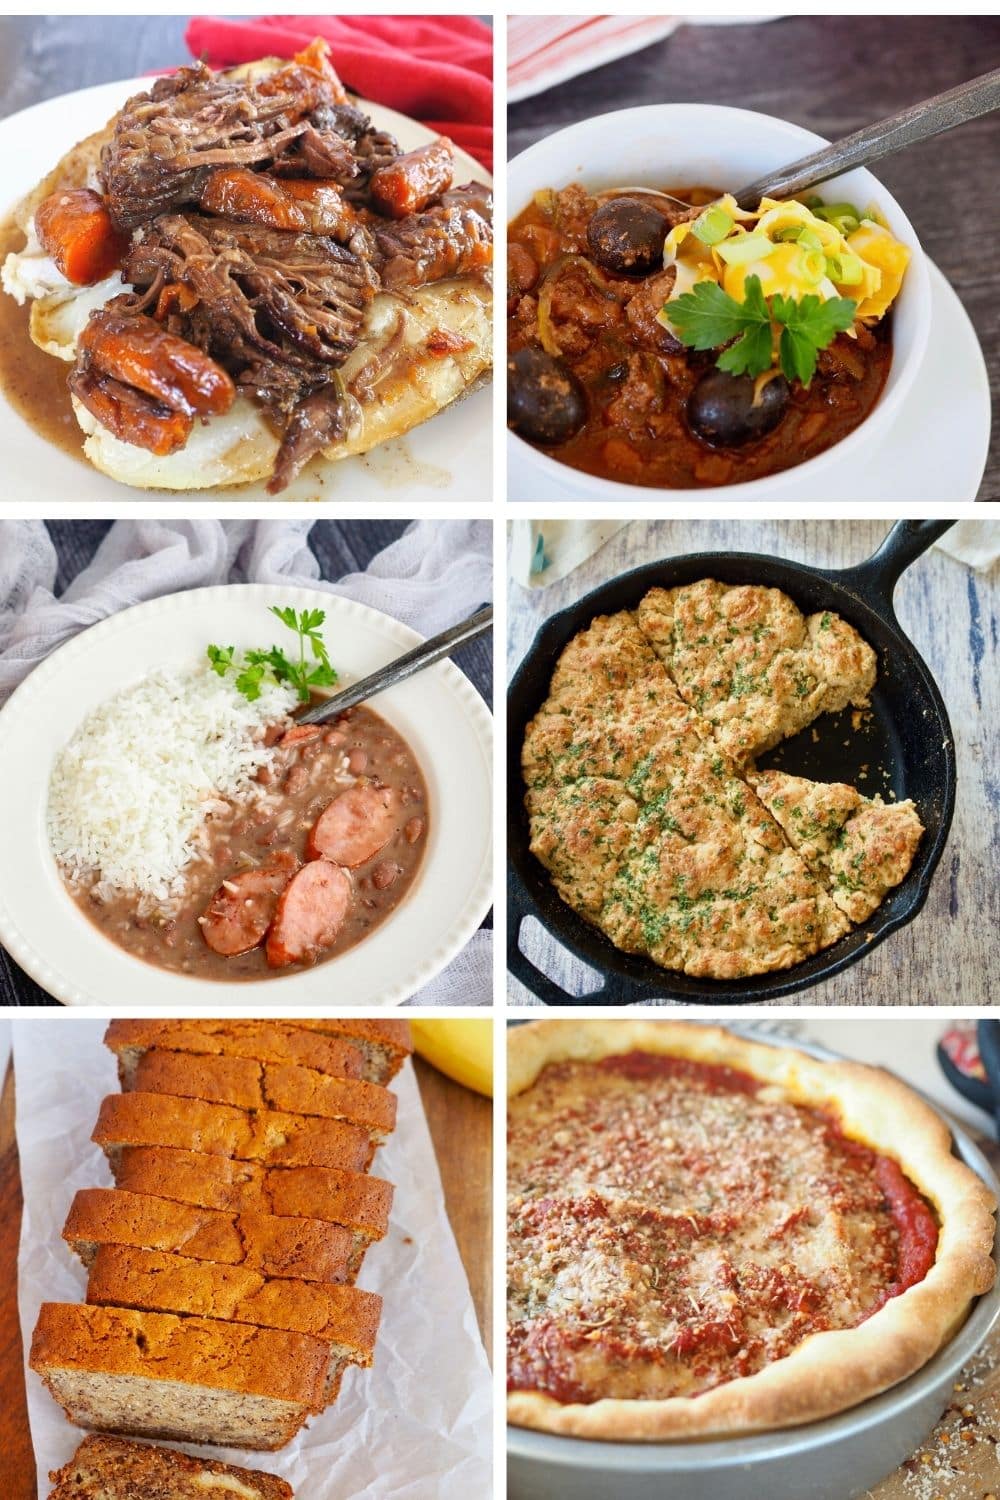 6 images of favorite recipes made this week, 1. Sunday Pot roast, 2. Firecracker Chili 3. Red Beans and Rice 4. Cheddar Bay Biscuits 5. Banana Bread 6. Chicago Style Deep Dish Pizza.